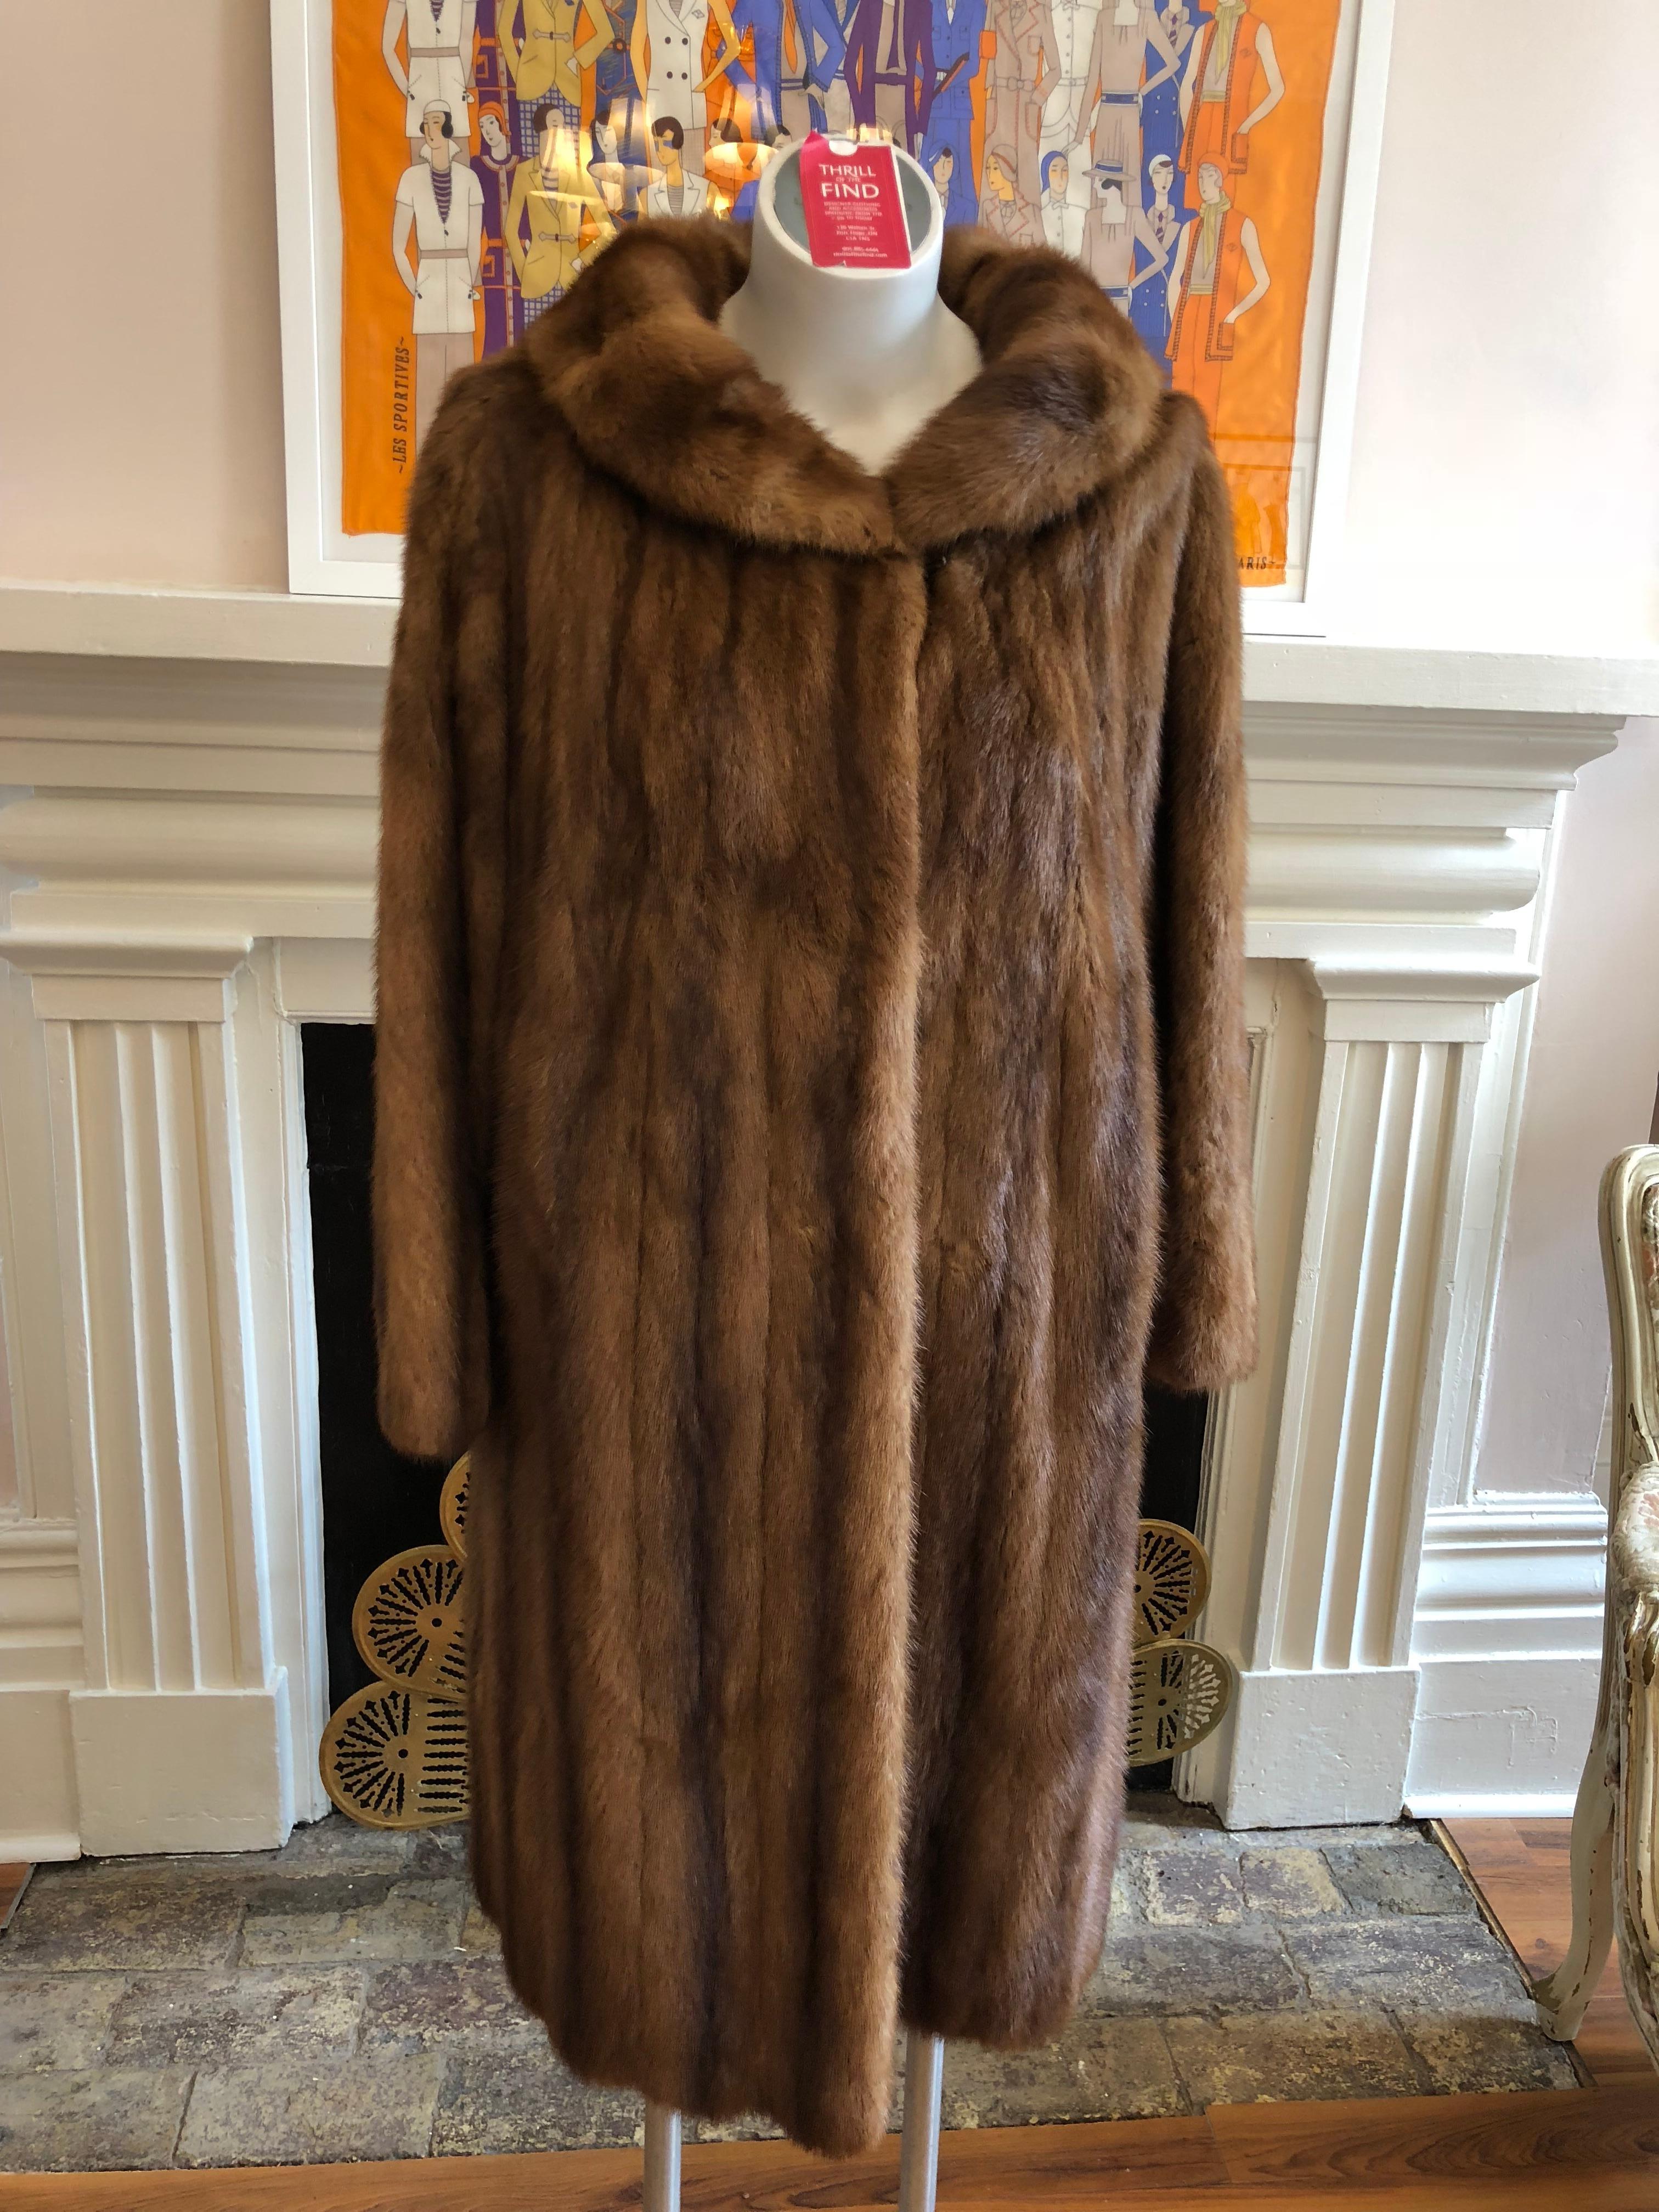 This coat is an early Christian Dior collaboration with Holt Renfrew thought to be during the 1951-53 period. The mink is in excellent condition for its age and has obviously been well taken care of, and that includes the lining. There is a nice